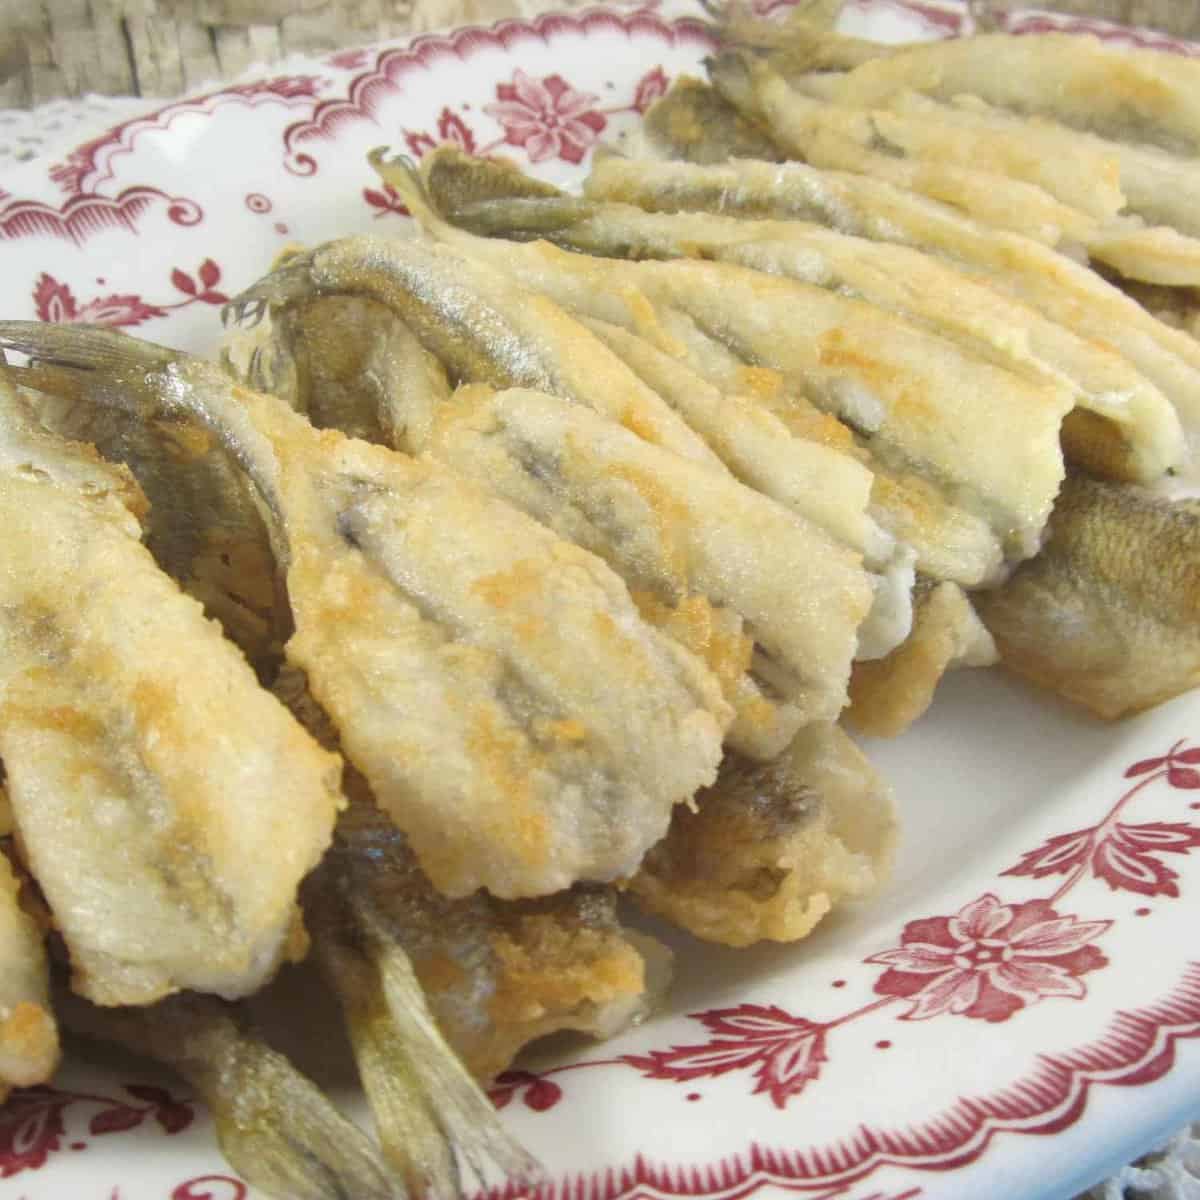  These smelts are the perfect appetizer or snack for any seafood lover.